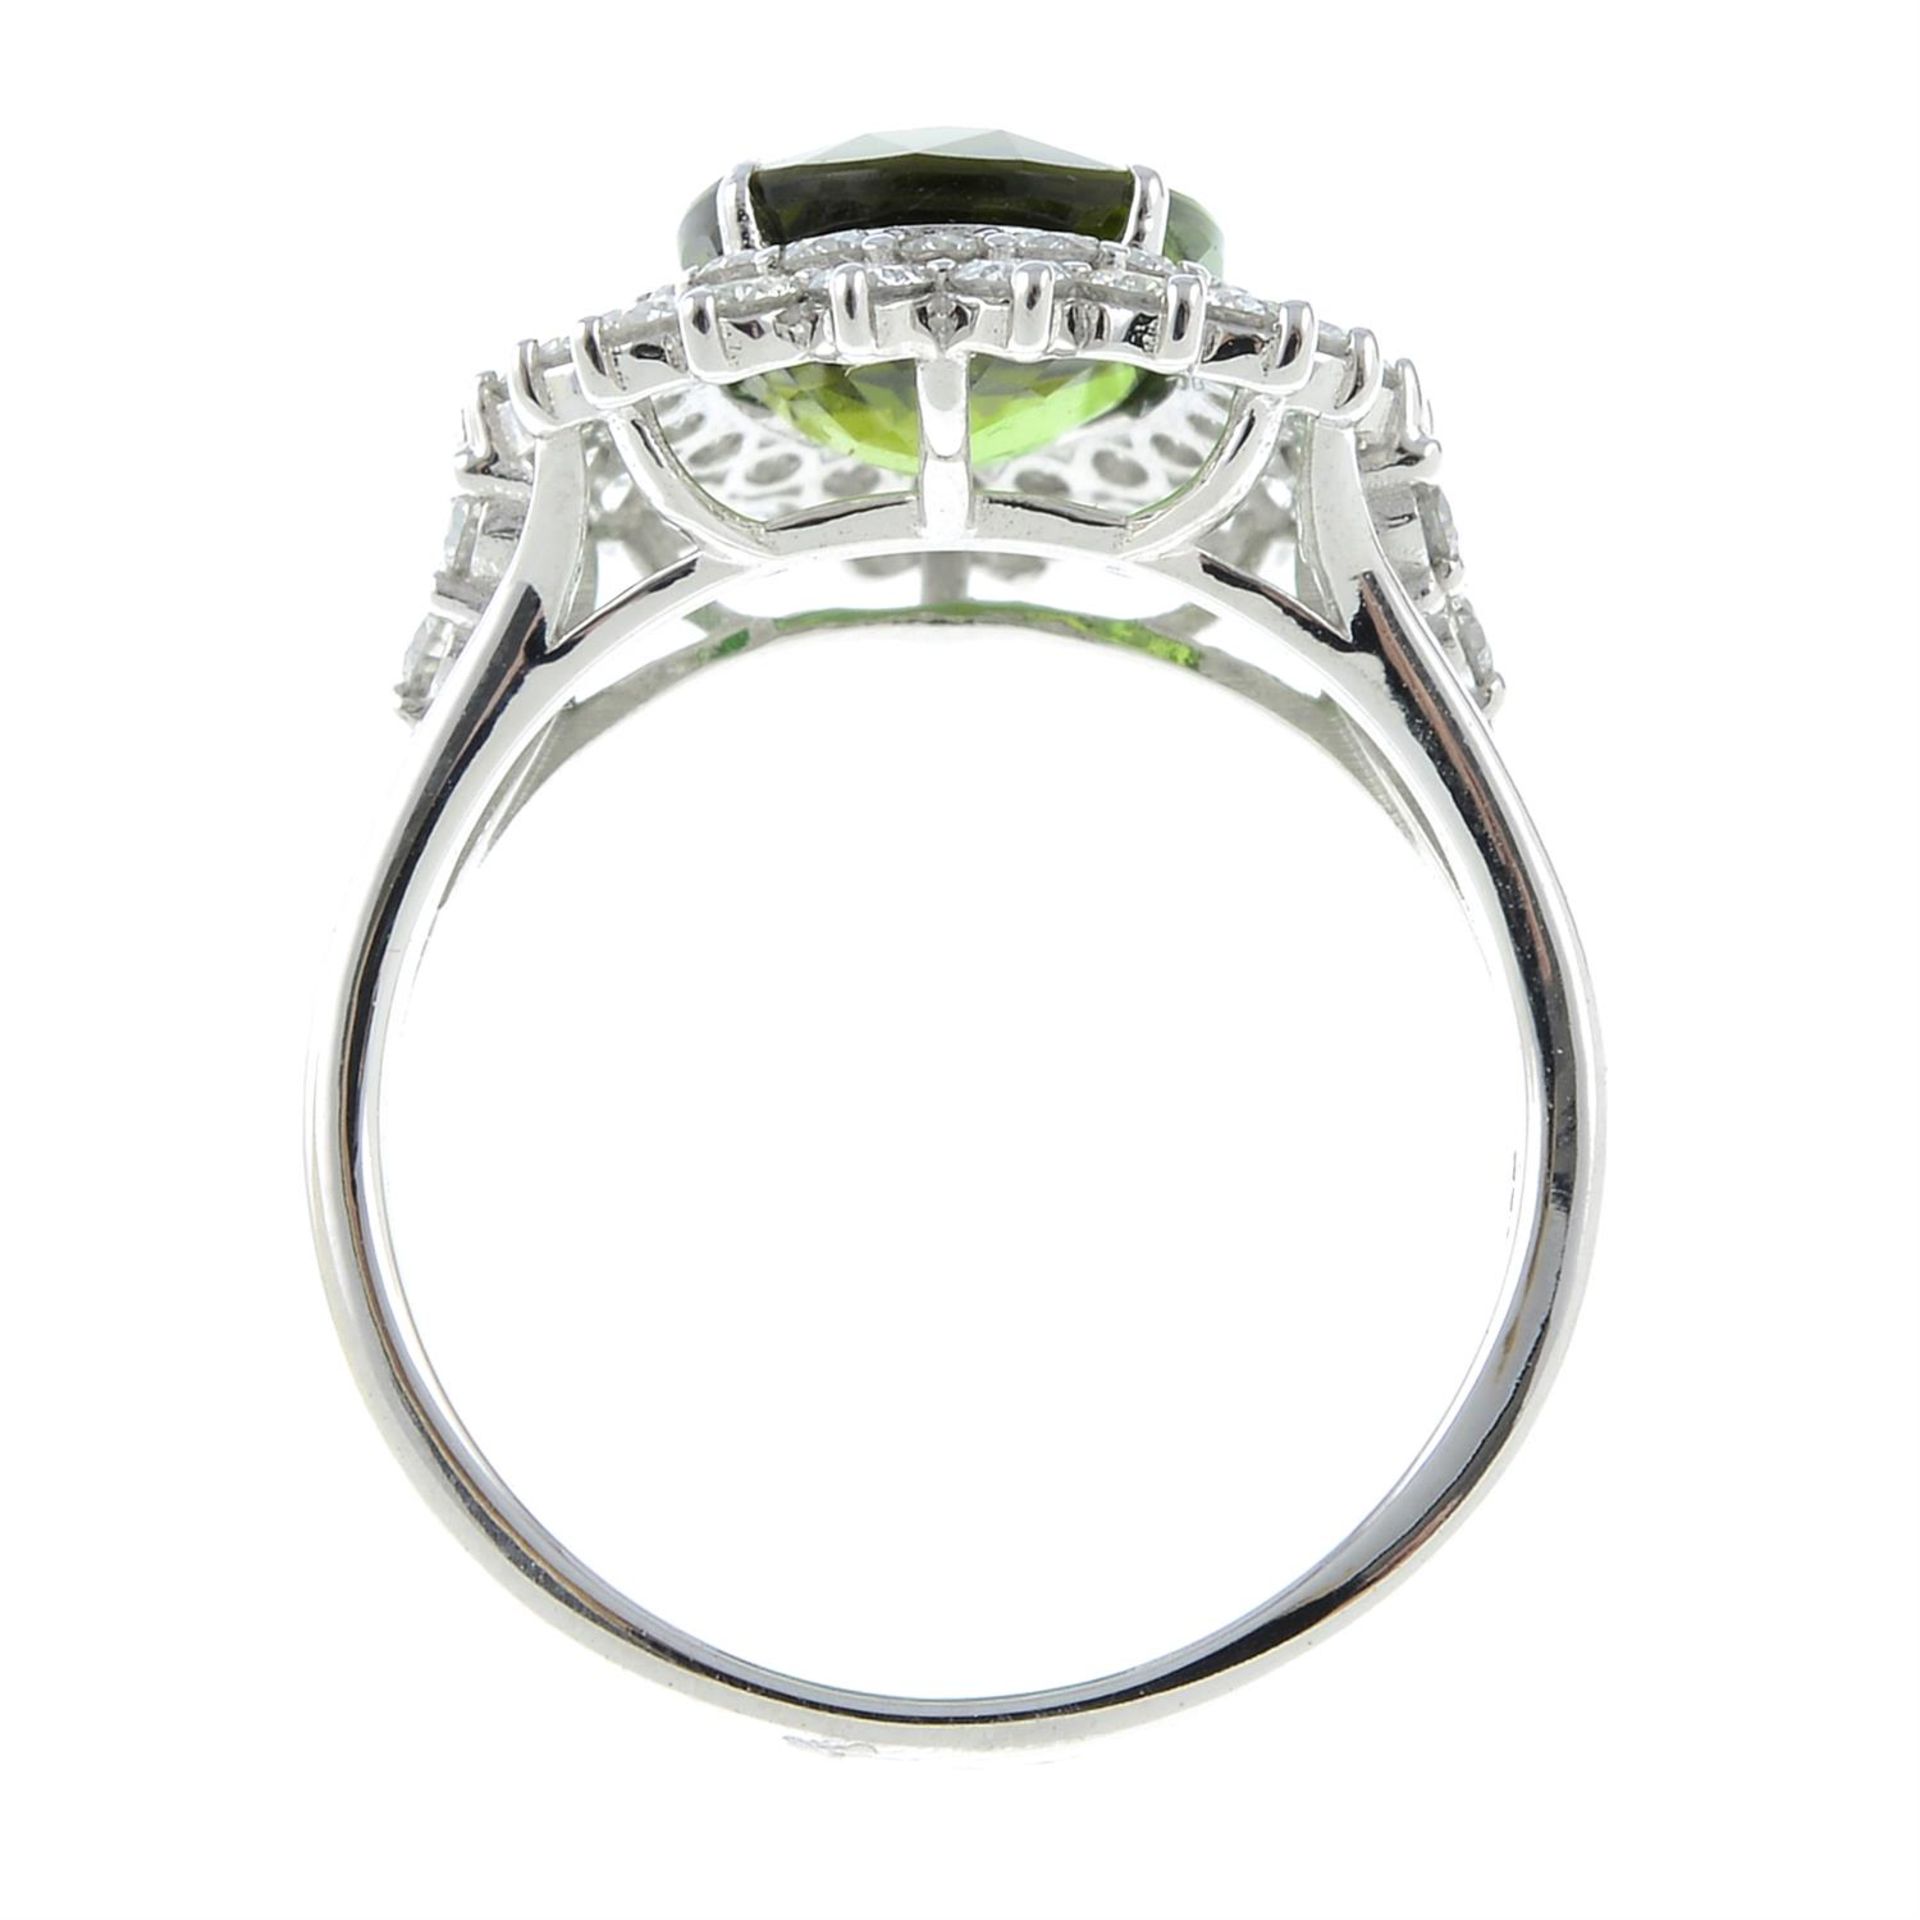 A green tourmaline ring, with brilliant-cut diamond surrounds and shoulders. - Image 5 of 6